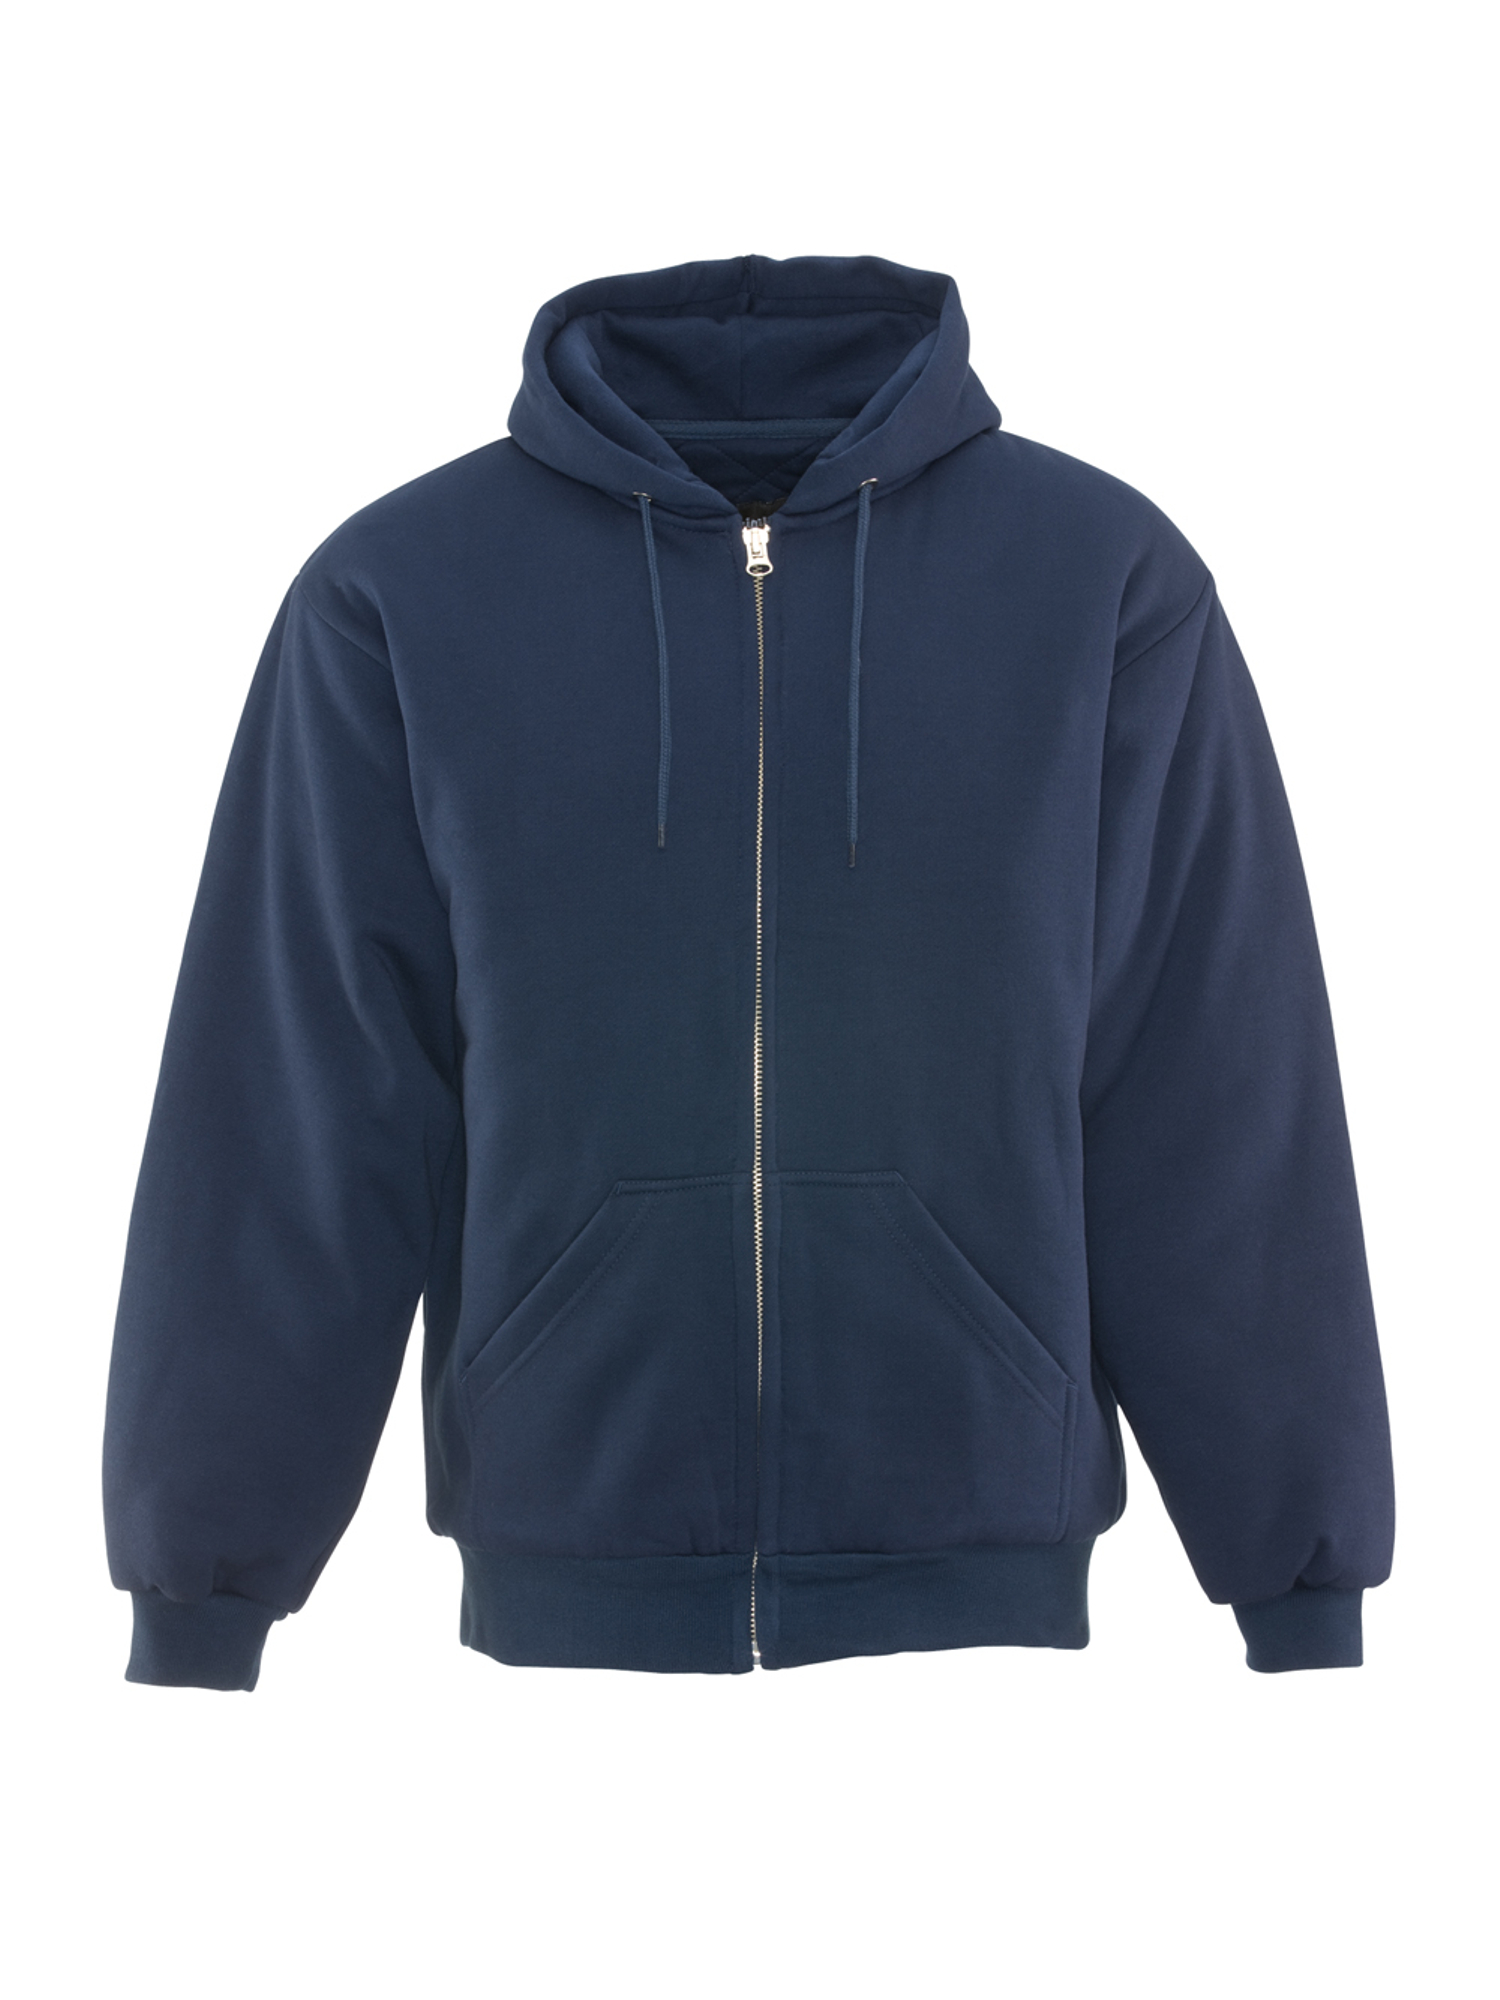 RefrigiWear Insulated Quilted Sweatshirt | Navy | Fit: Big & Tall | Ragg Wool/Polyester/Fabric | L